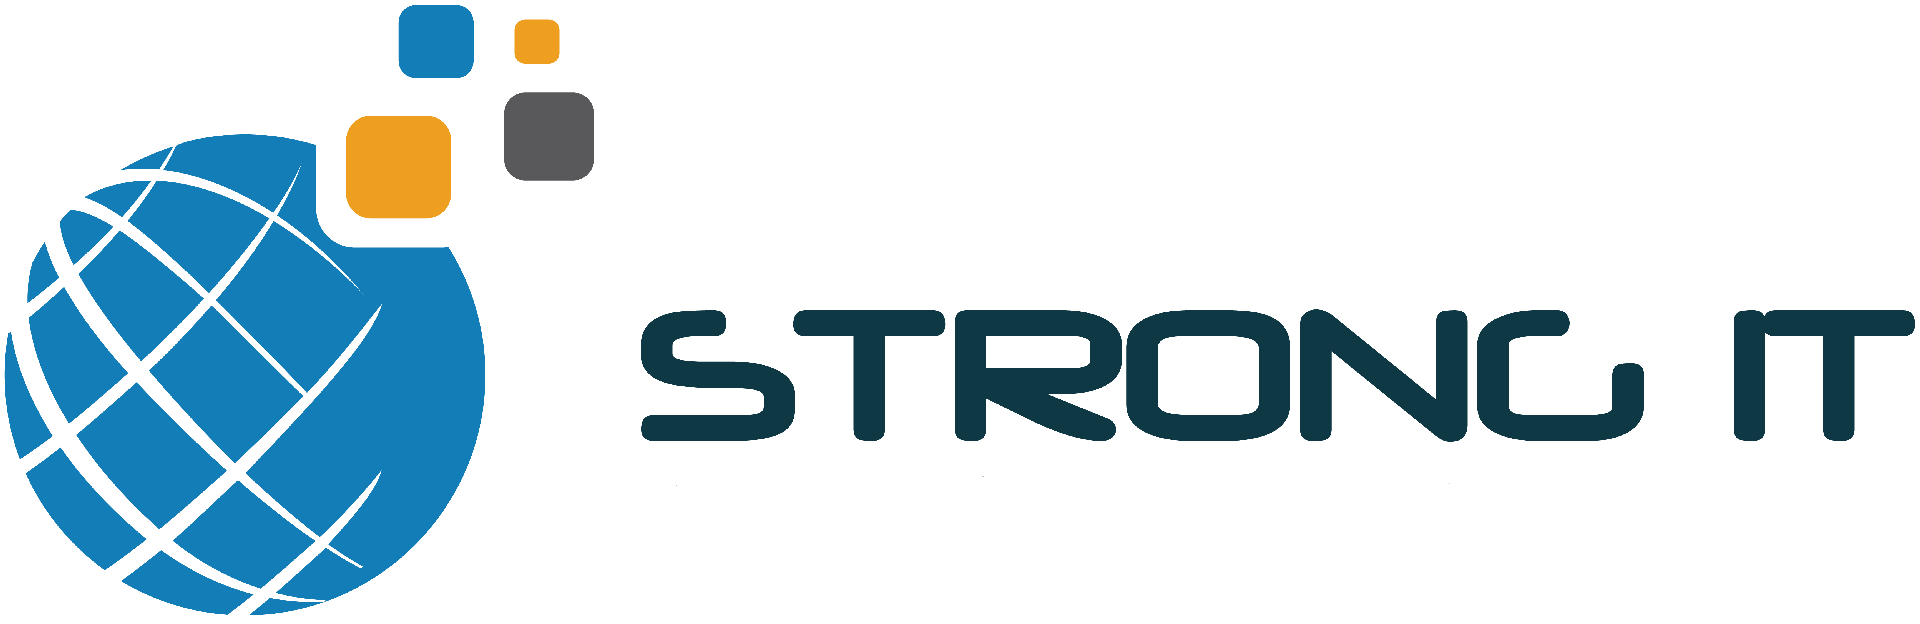 STRONG IT logo